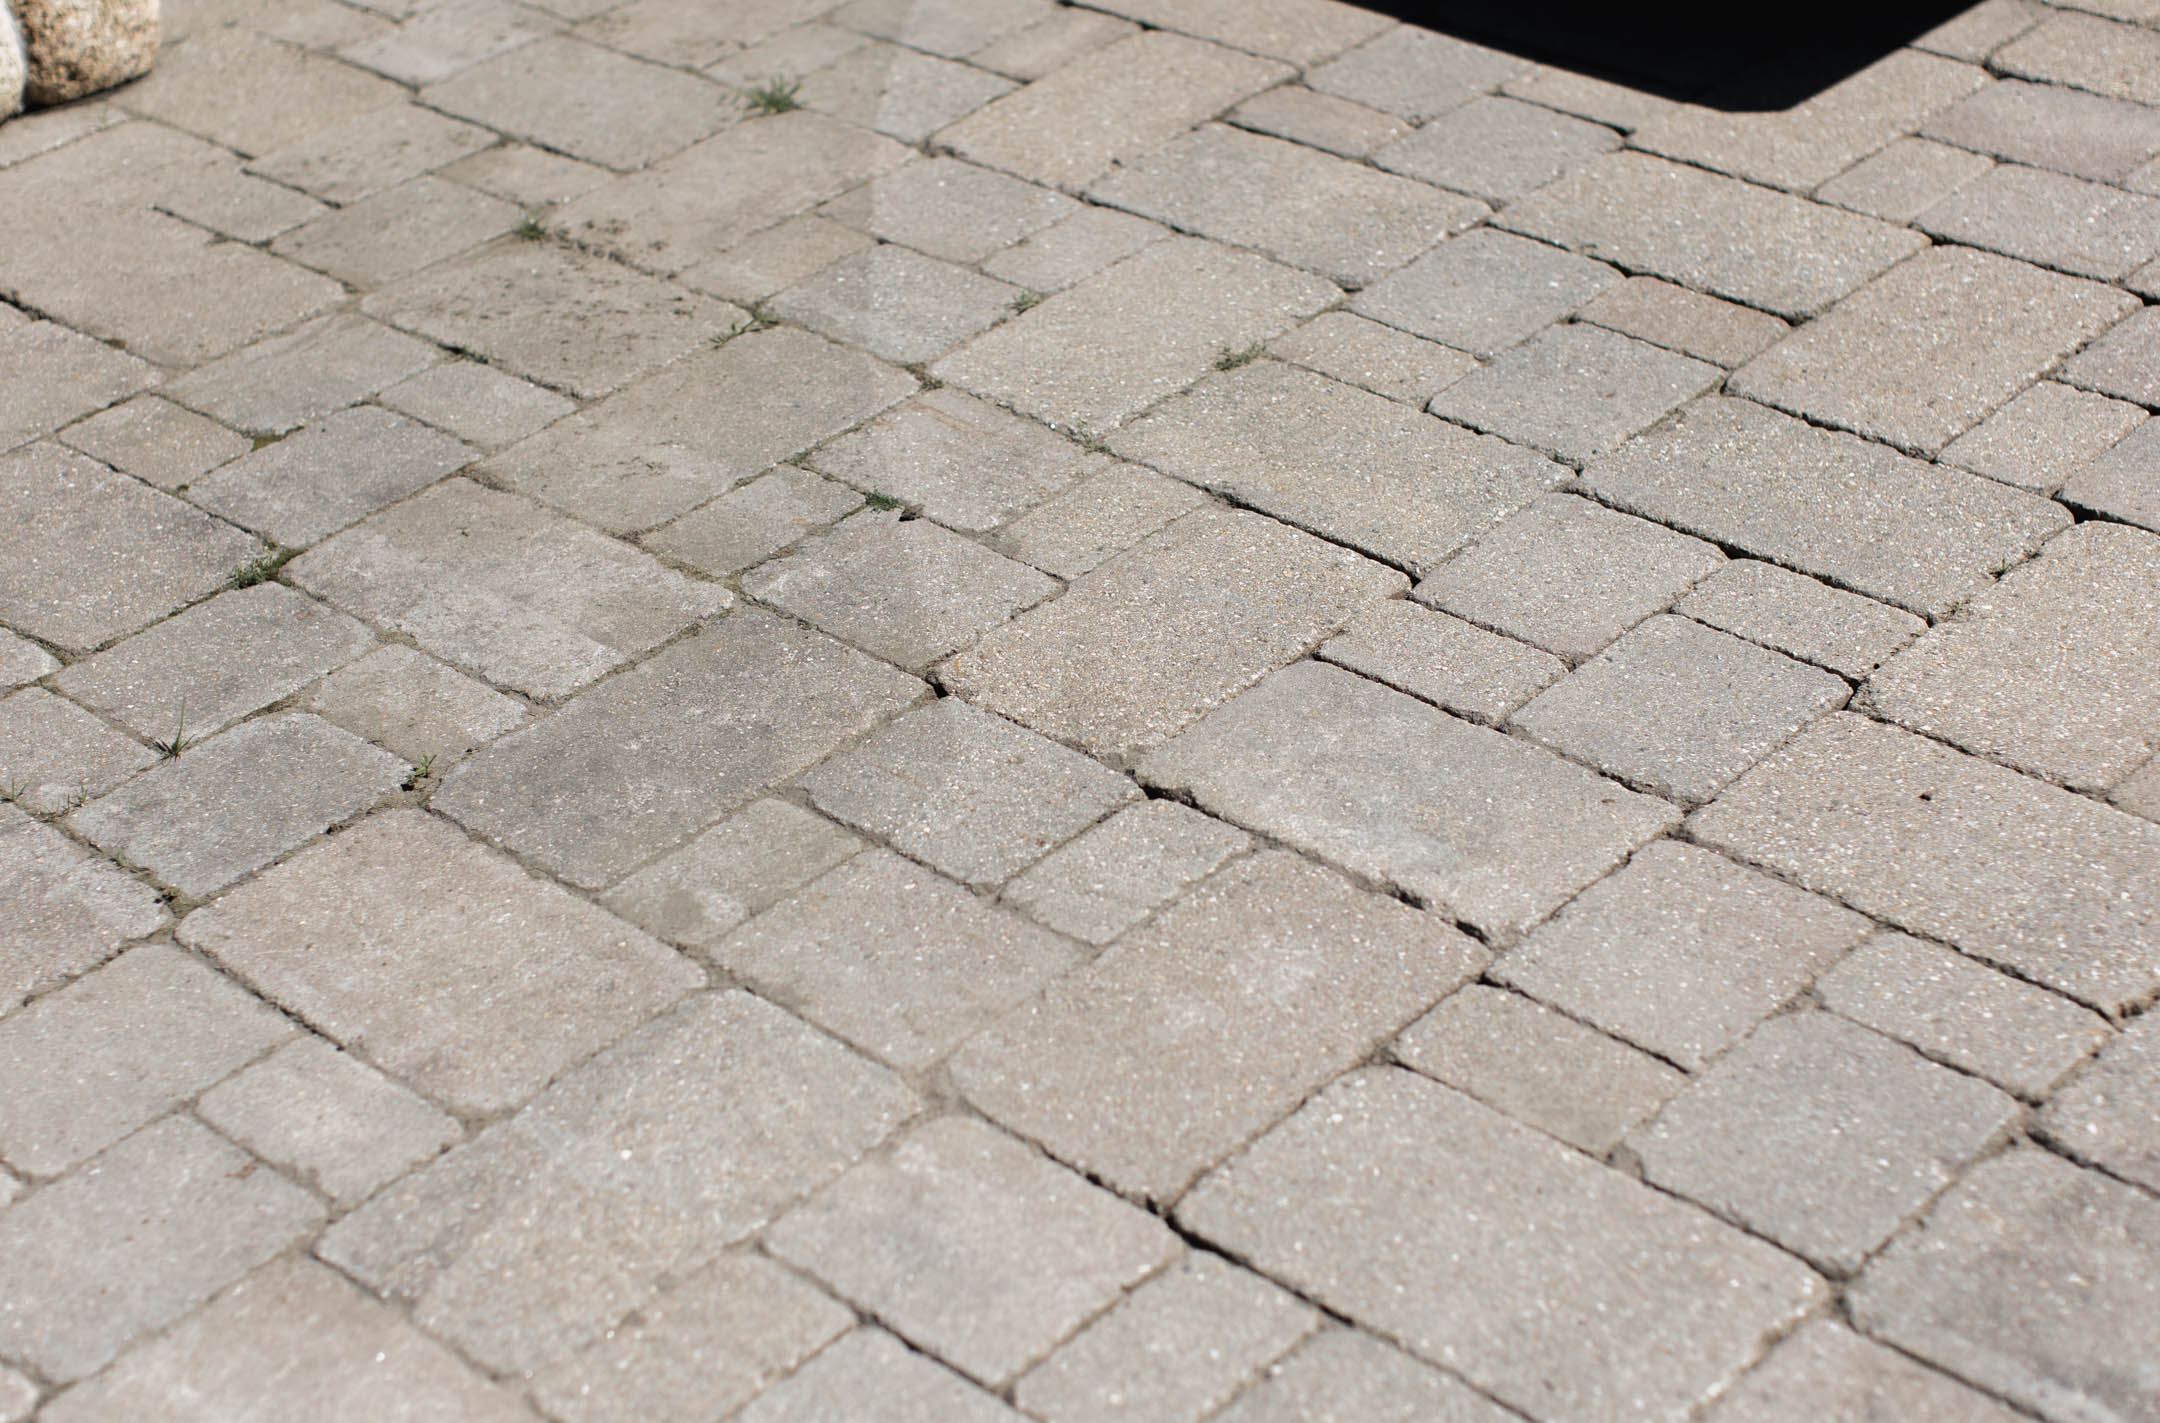 cleaning residential pavers